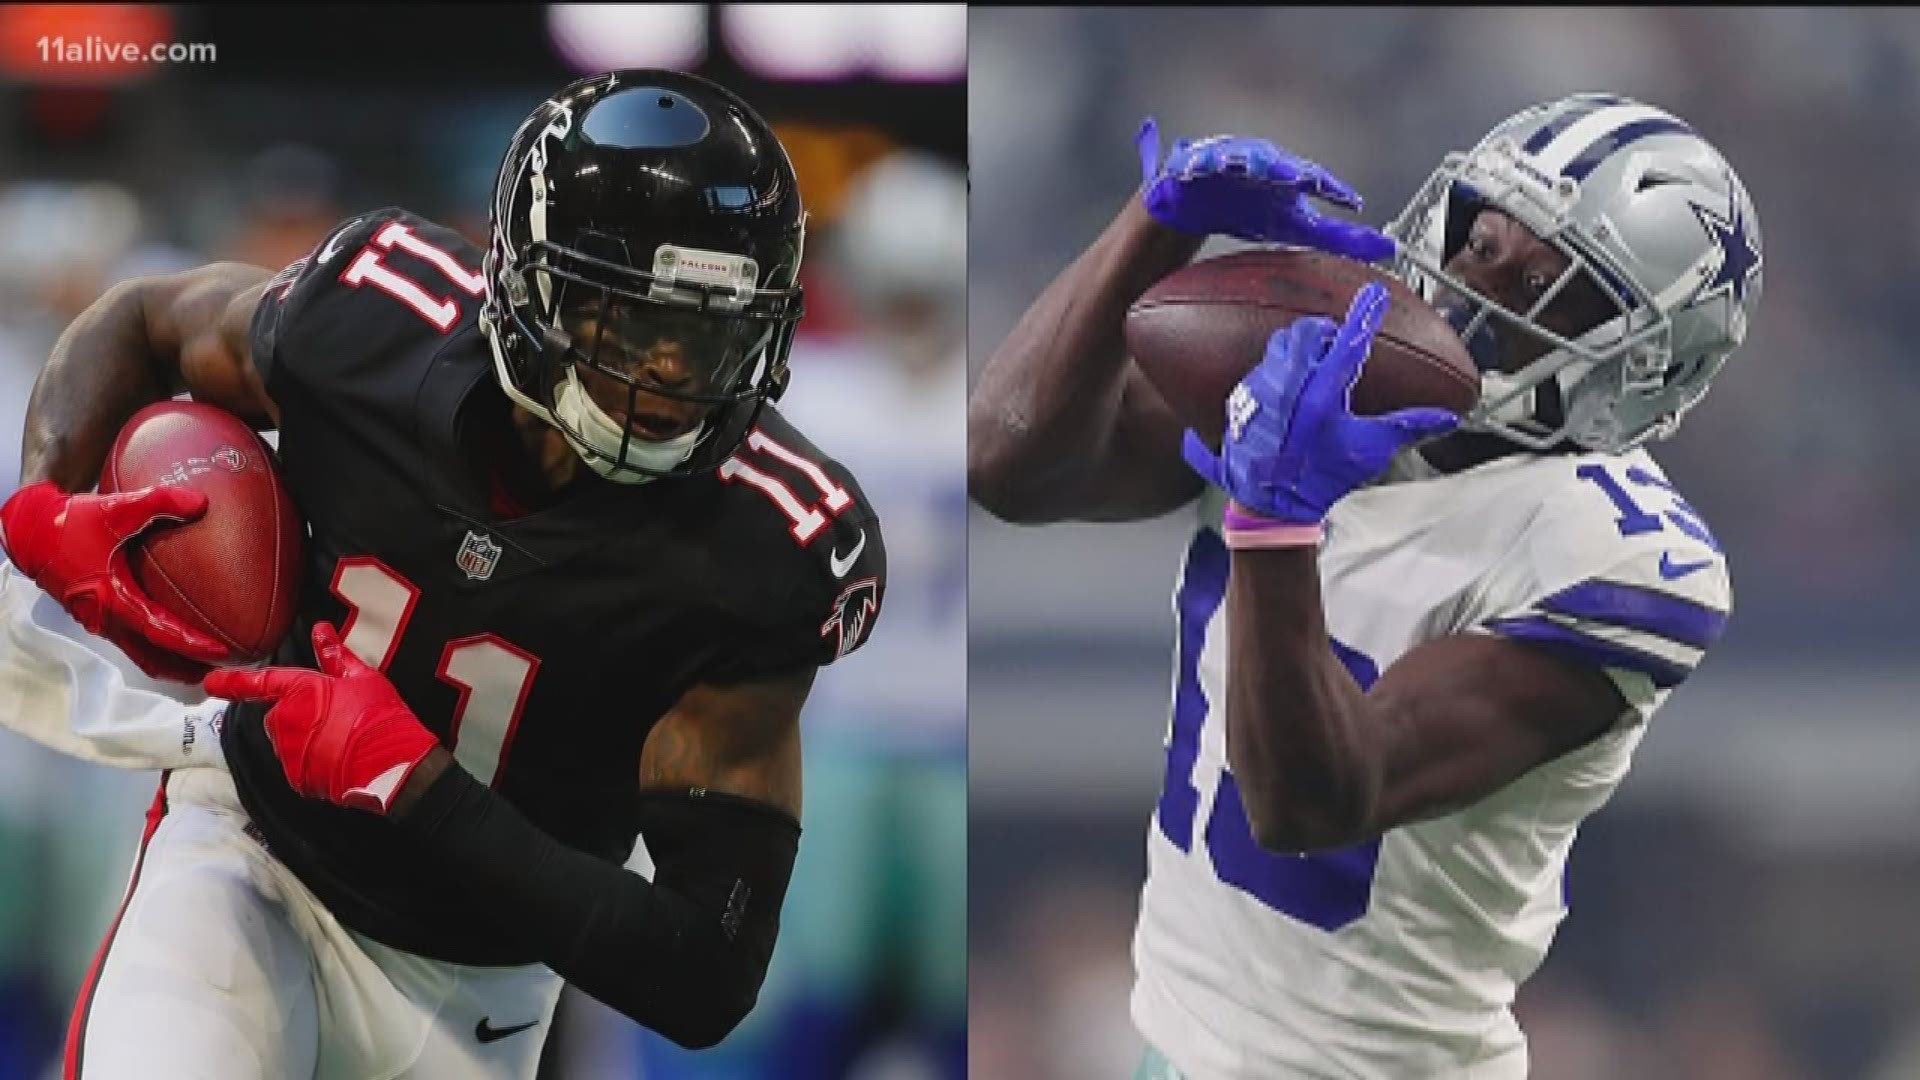 Falcons star Julio Jones and Cowboys receiver Michael Gallup both learned tragic news about their family members after Sunday's game.